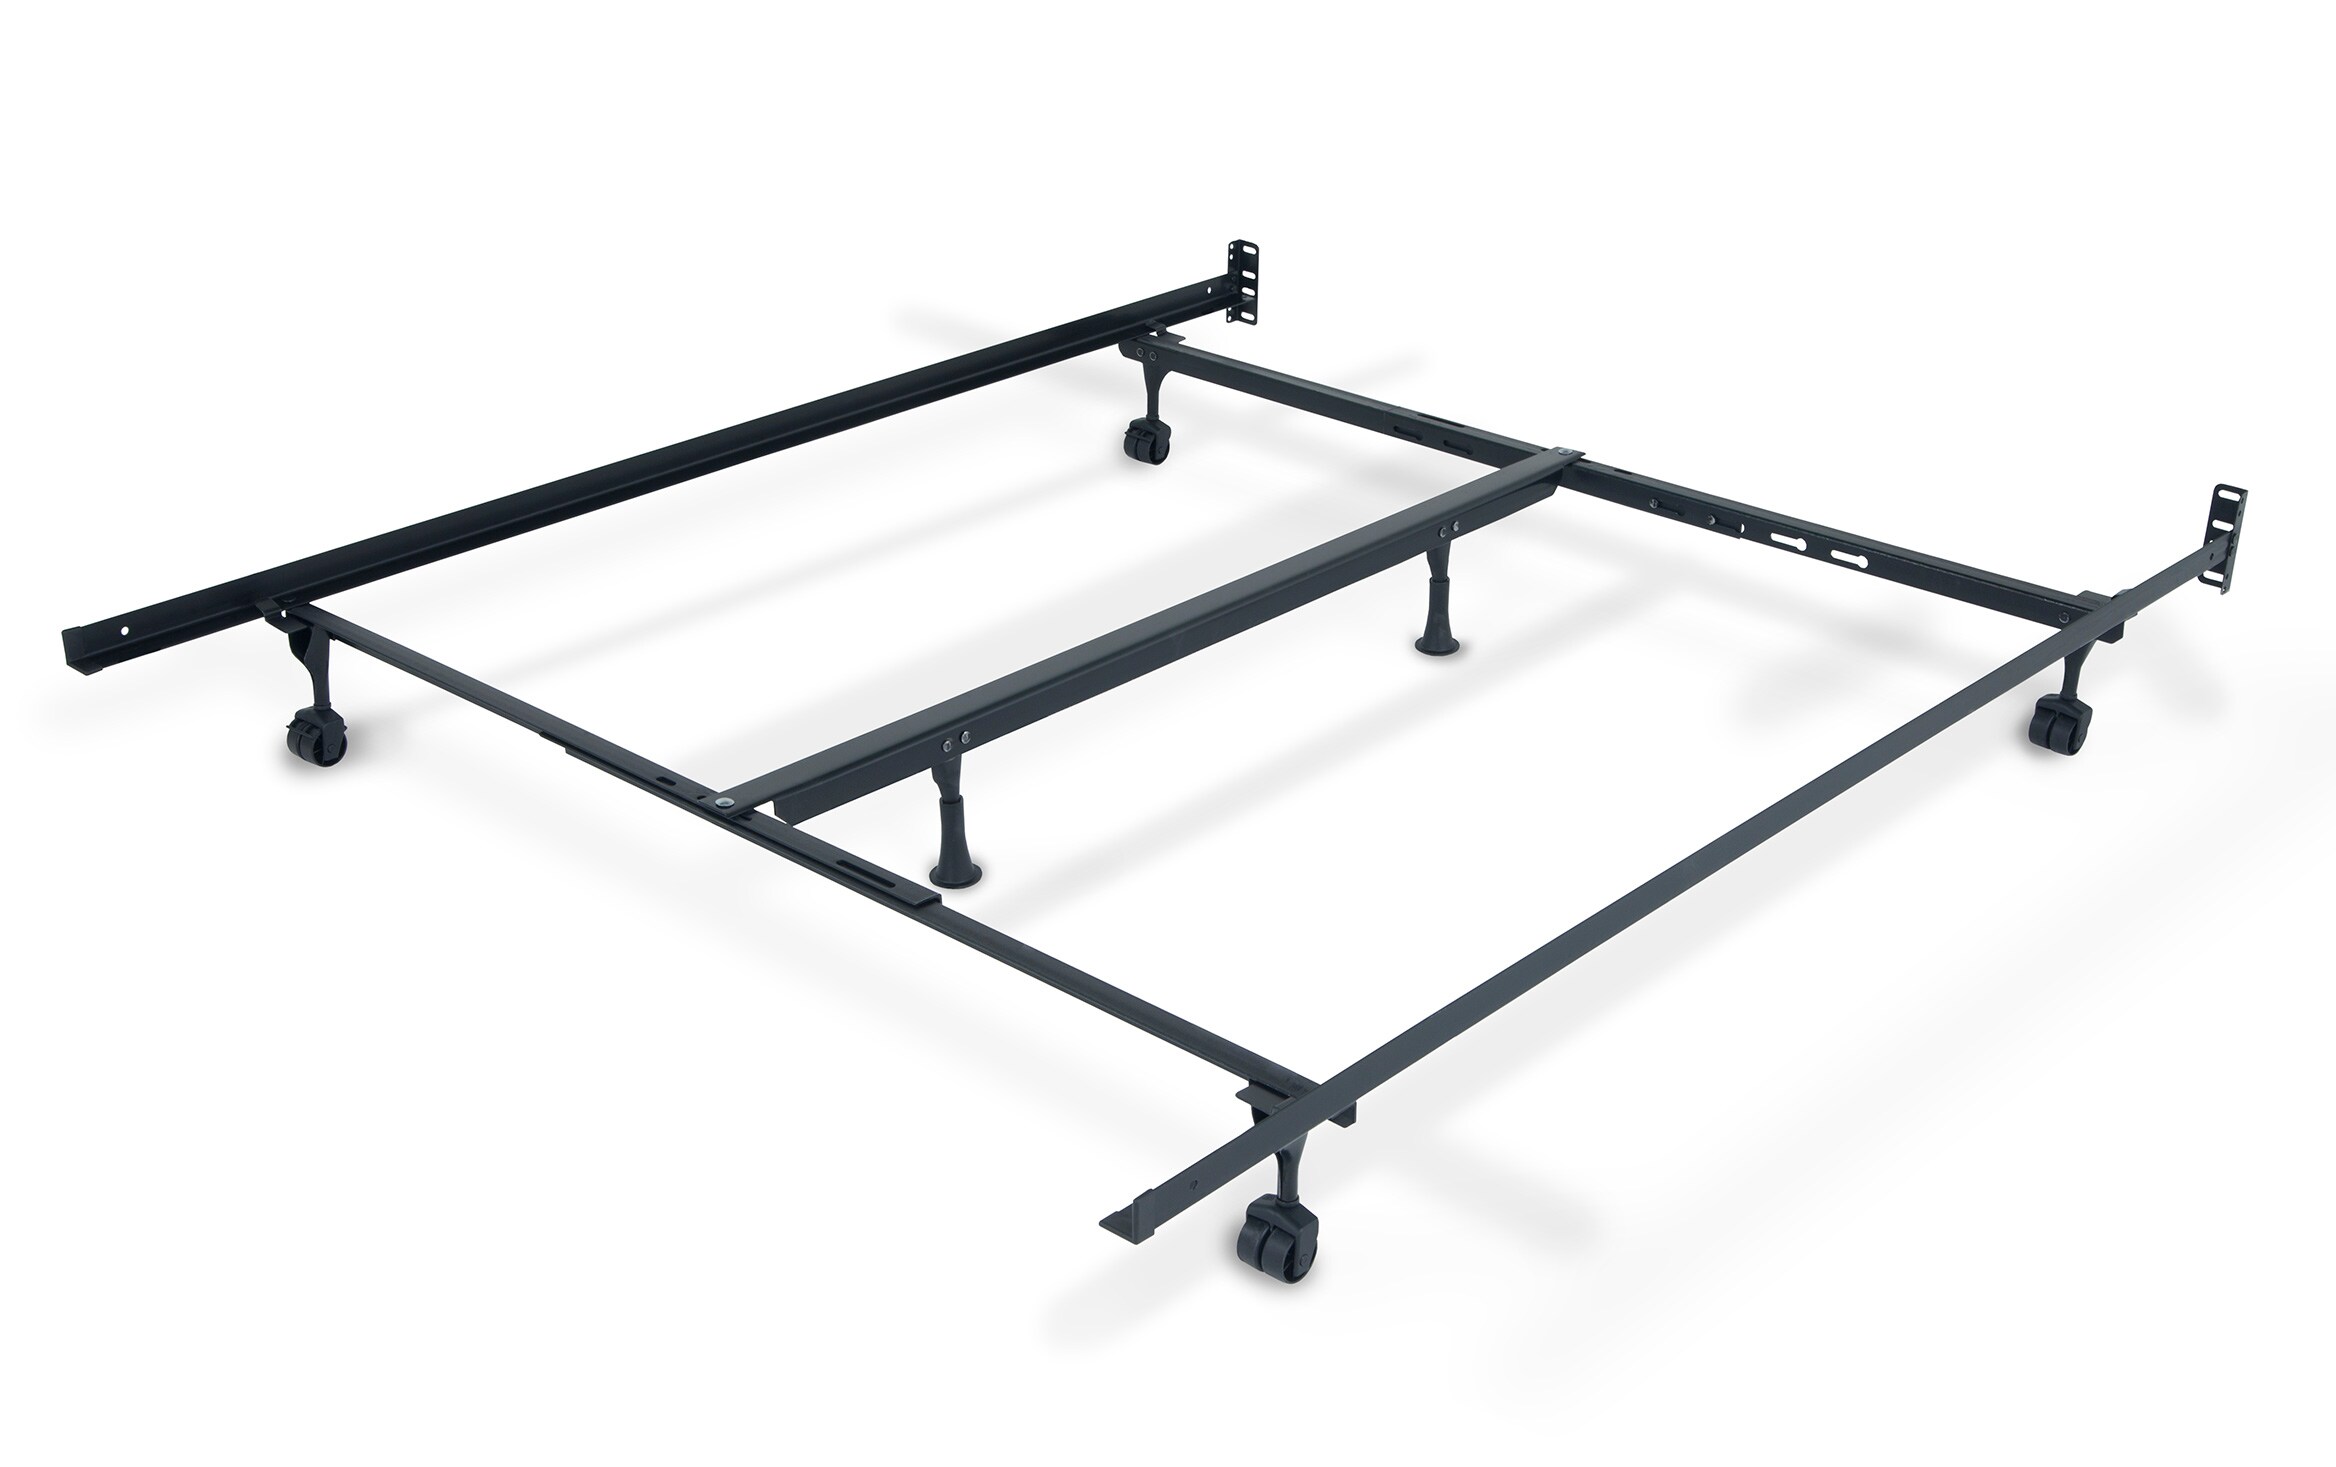 Queen King Bed Frame With Casters Bobs Com,Smoked Salmon Appetizer